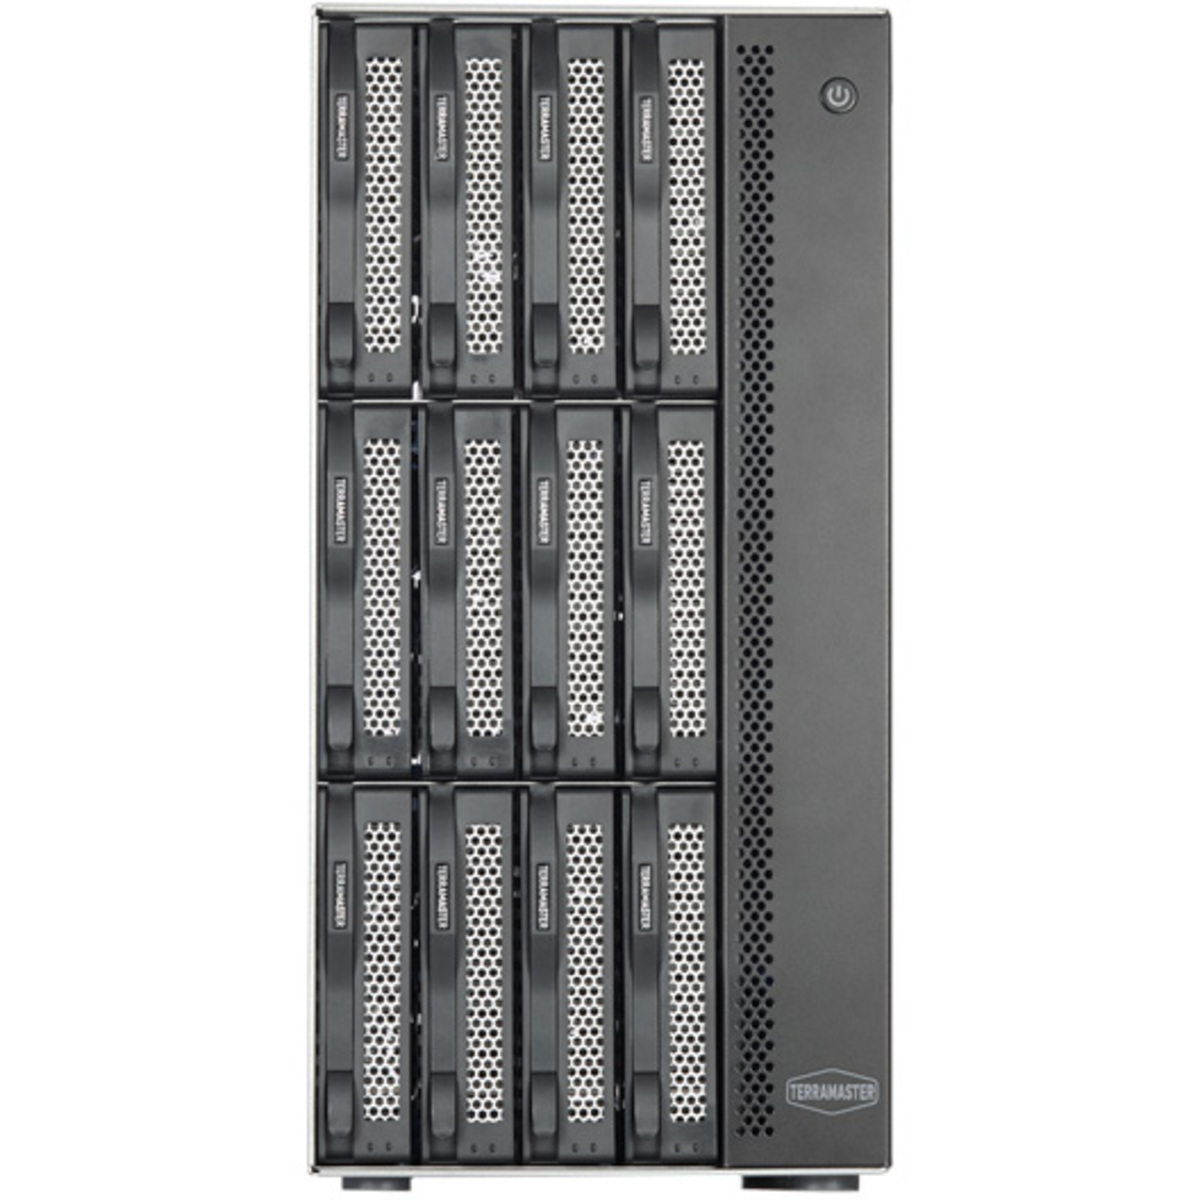 TerraMaster T12-423 84tb 12-Bay Desktop Multimedia / Power User / Business NAS - Network Attached Storage Device 7x12tb Toshiba Enterprise Capacity MG07ACA12TE 3.5 7200rpm SATA 6Gb/s HDD ENTERPRISE Class Drives Installed - Burn-In Tested T12-423